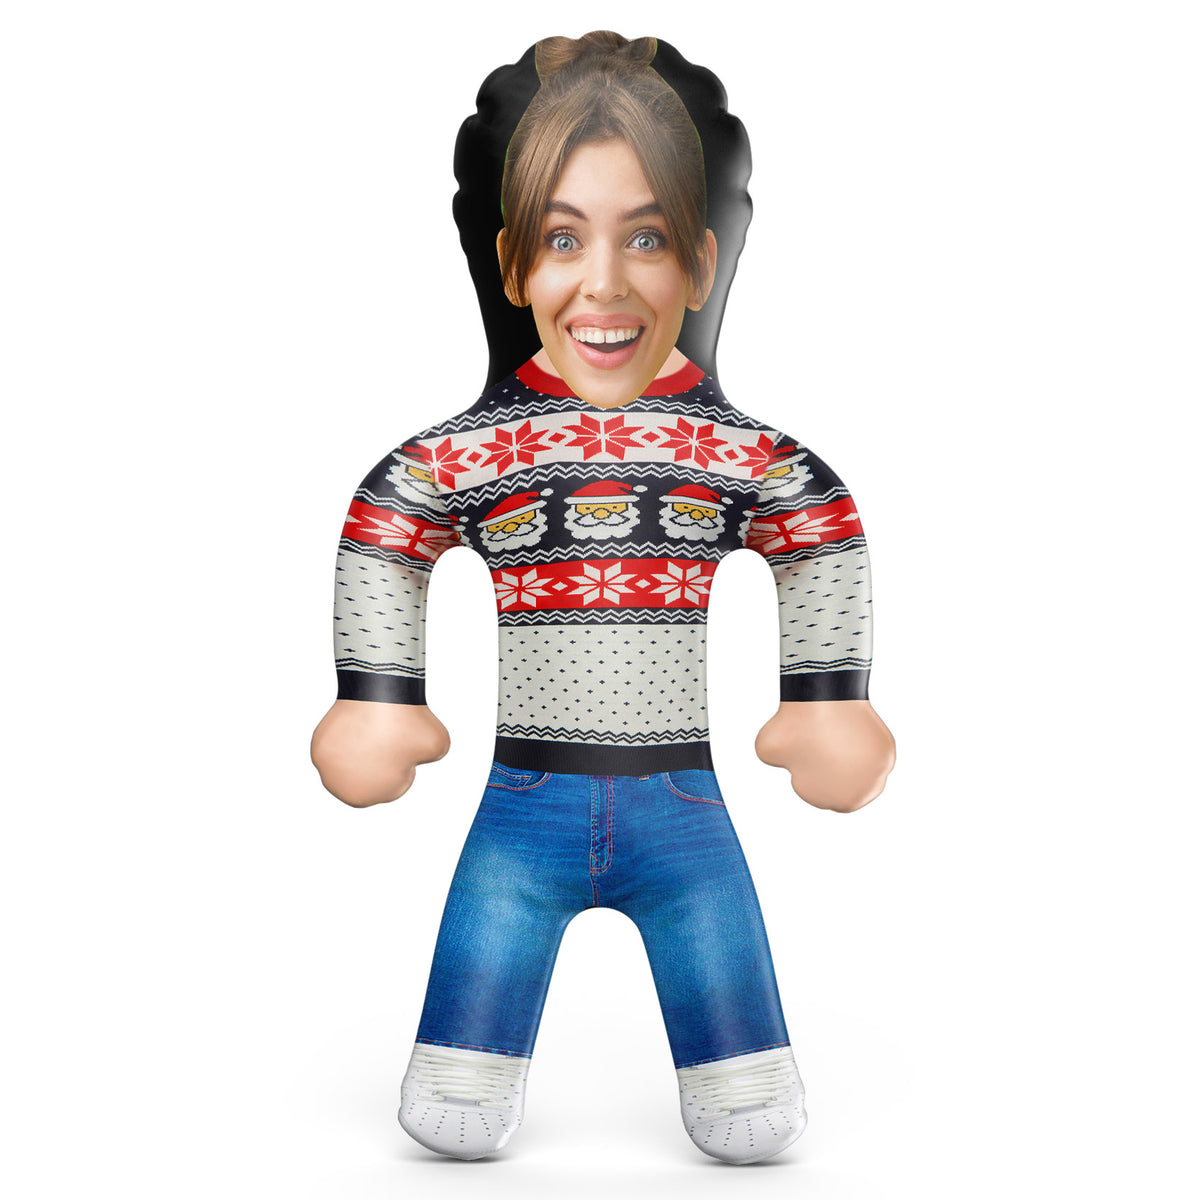 Christmas Jumper Inflatable Doll - Xmas Jumper Blow Up Doll